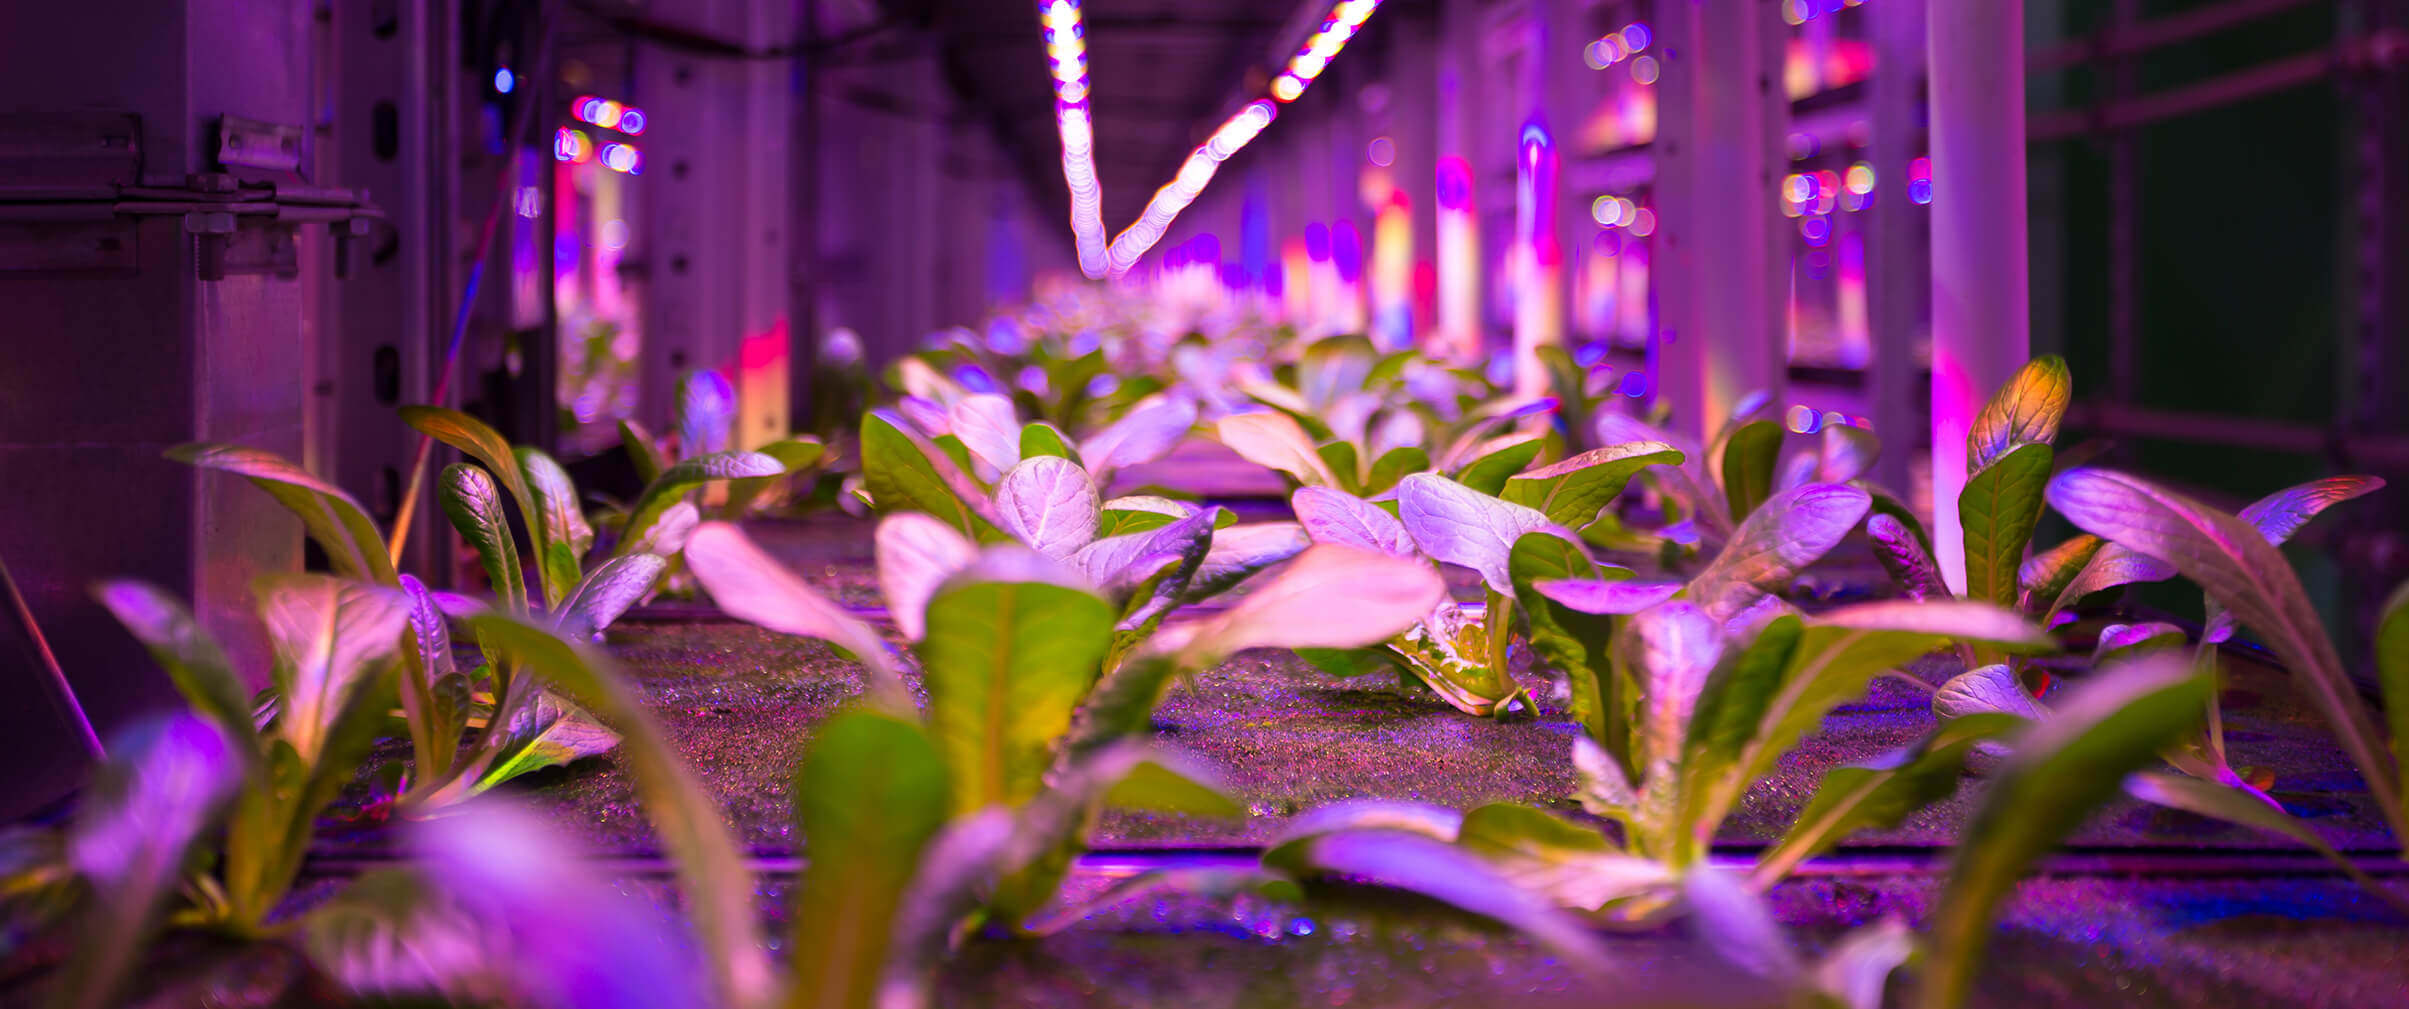 Plants grown indoors with ultraviolet light